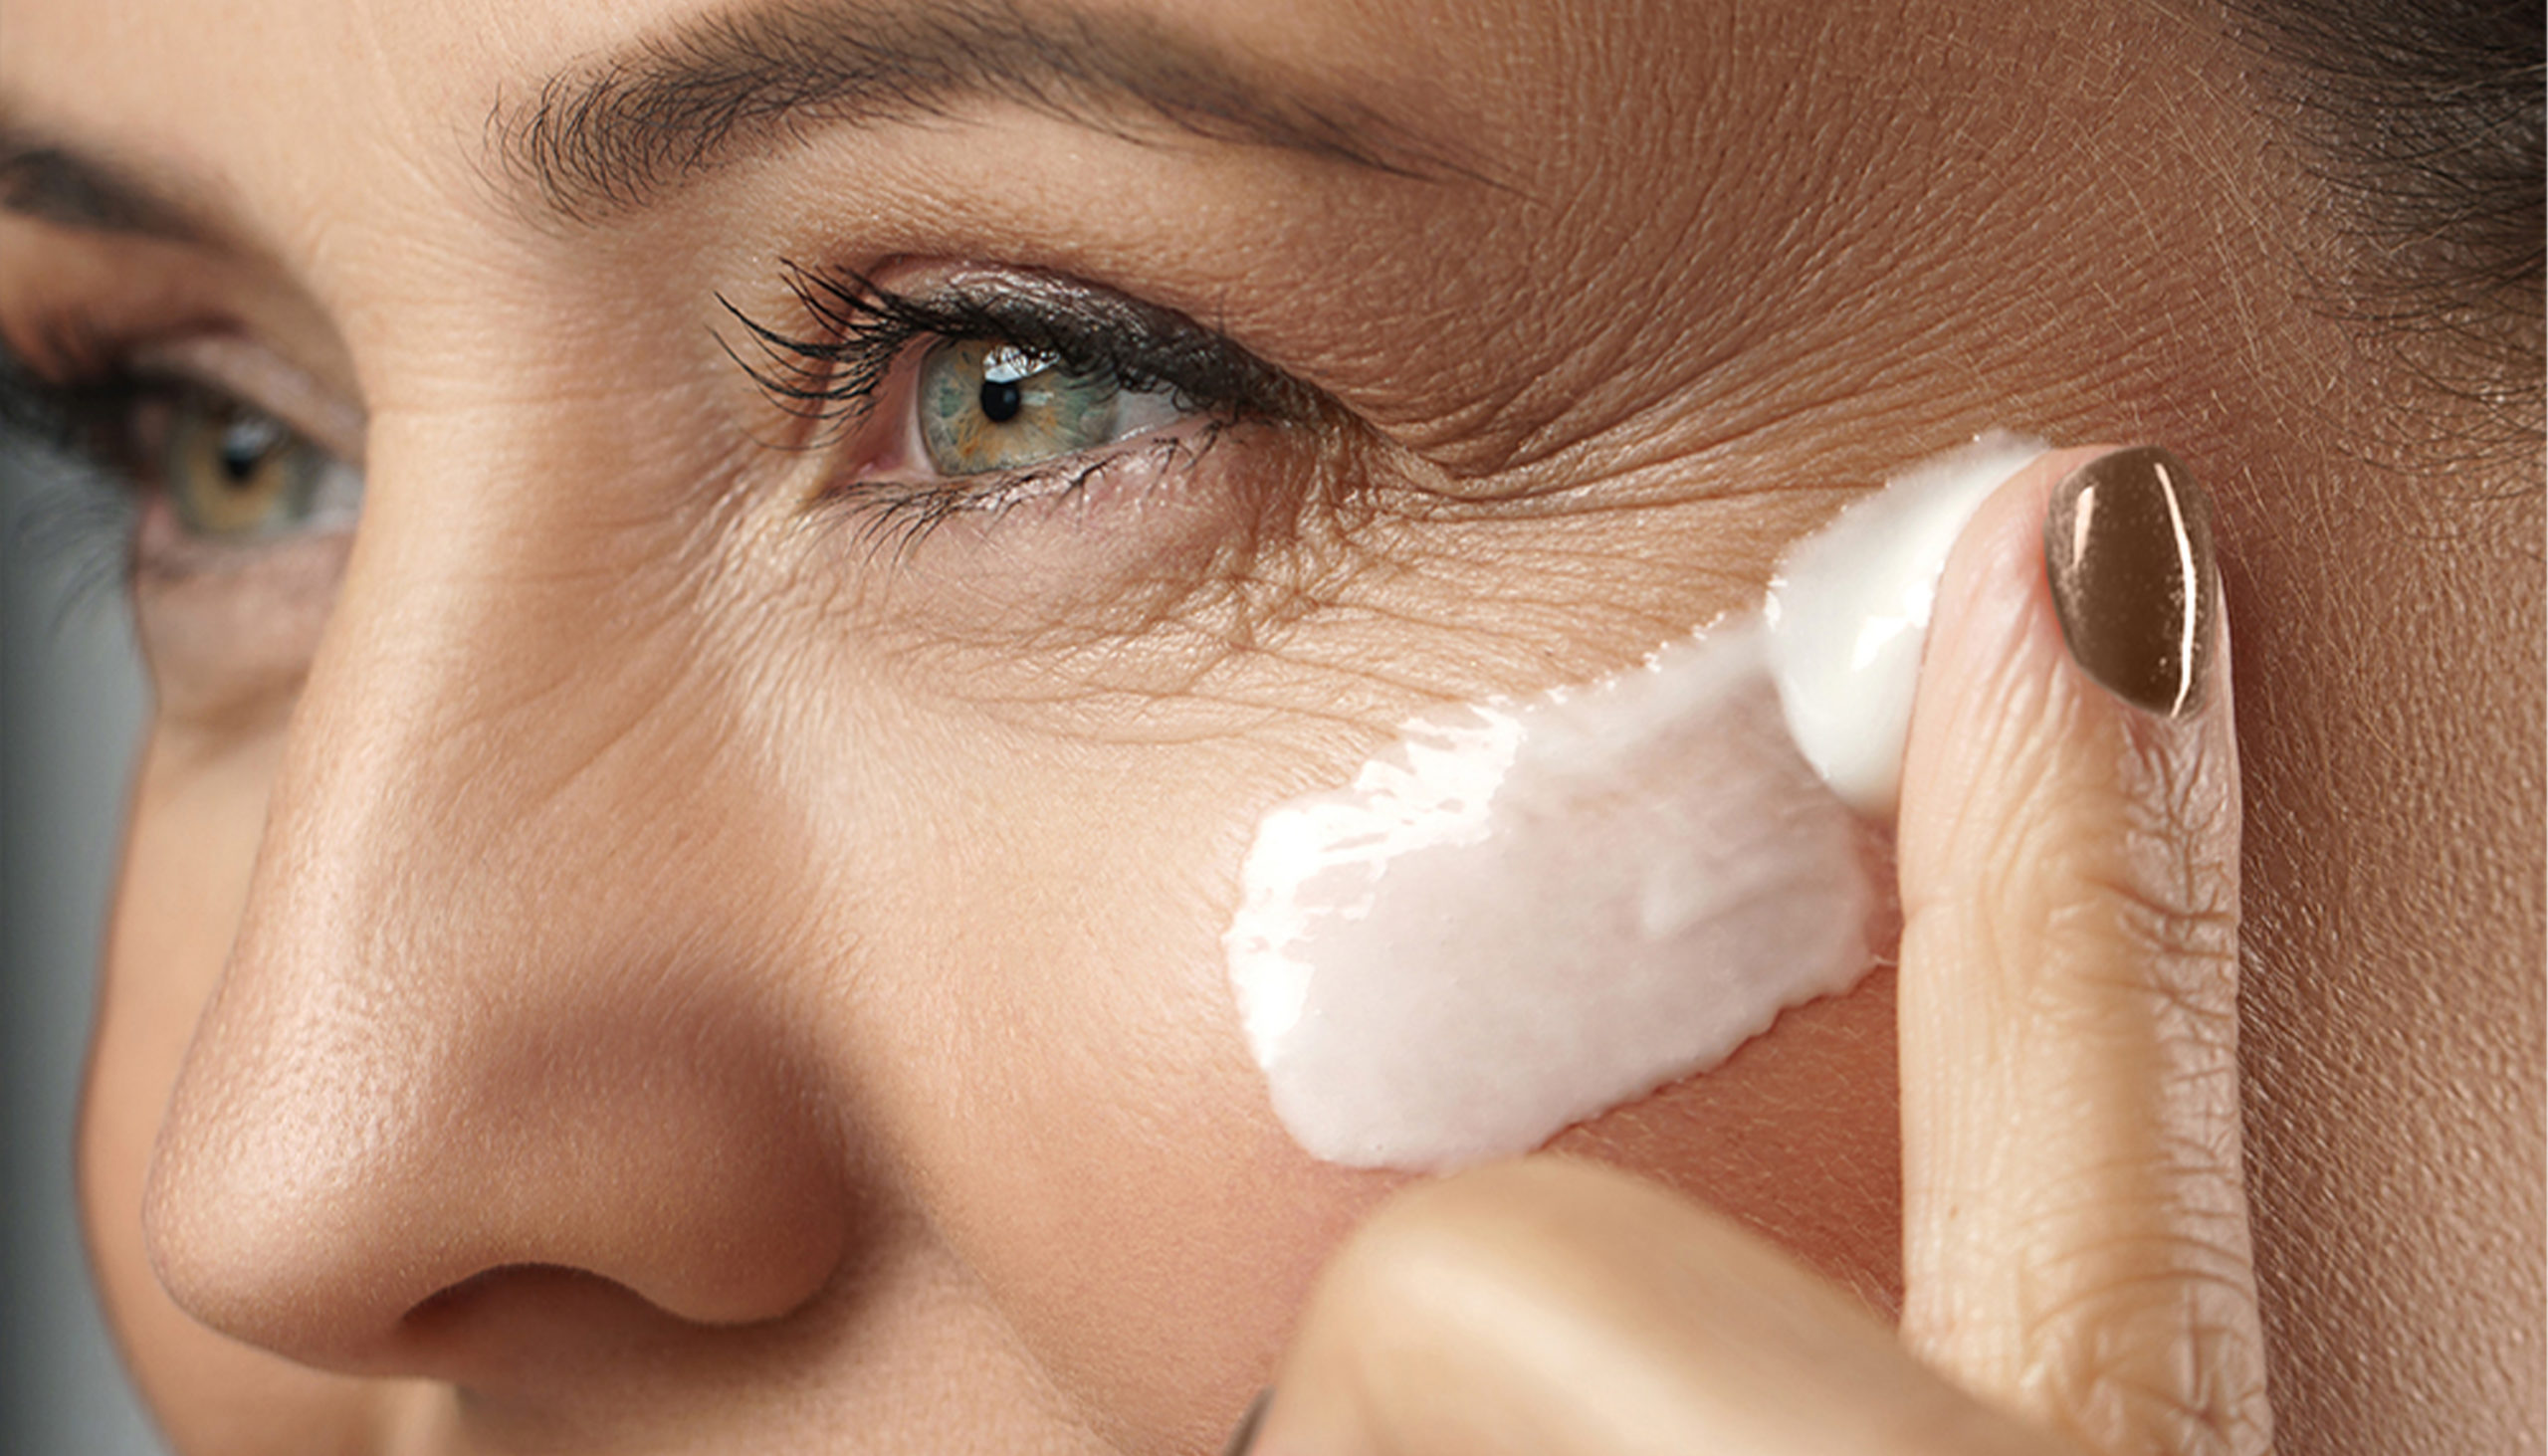 7 Things to Never Do When Applying Skin Care